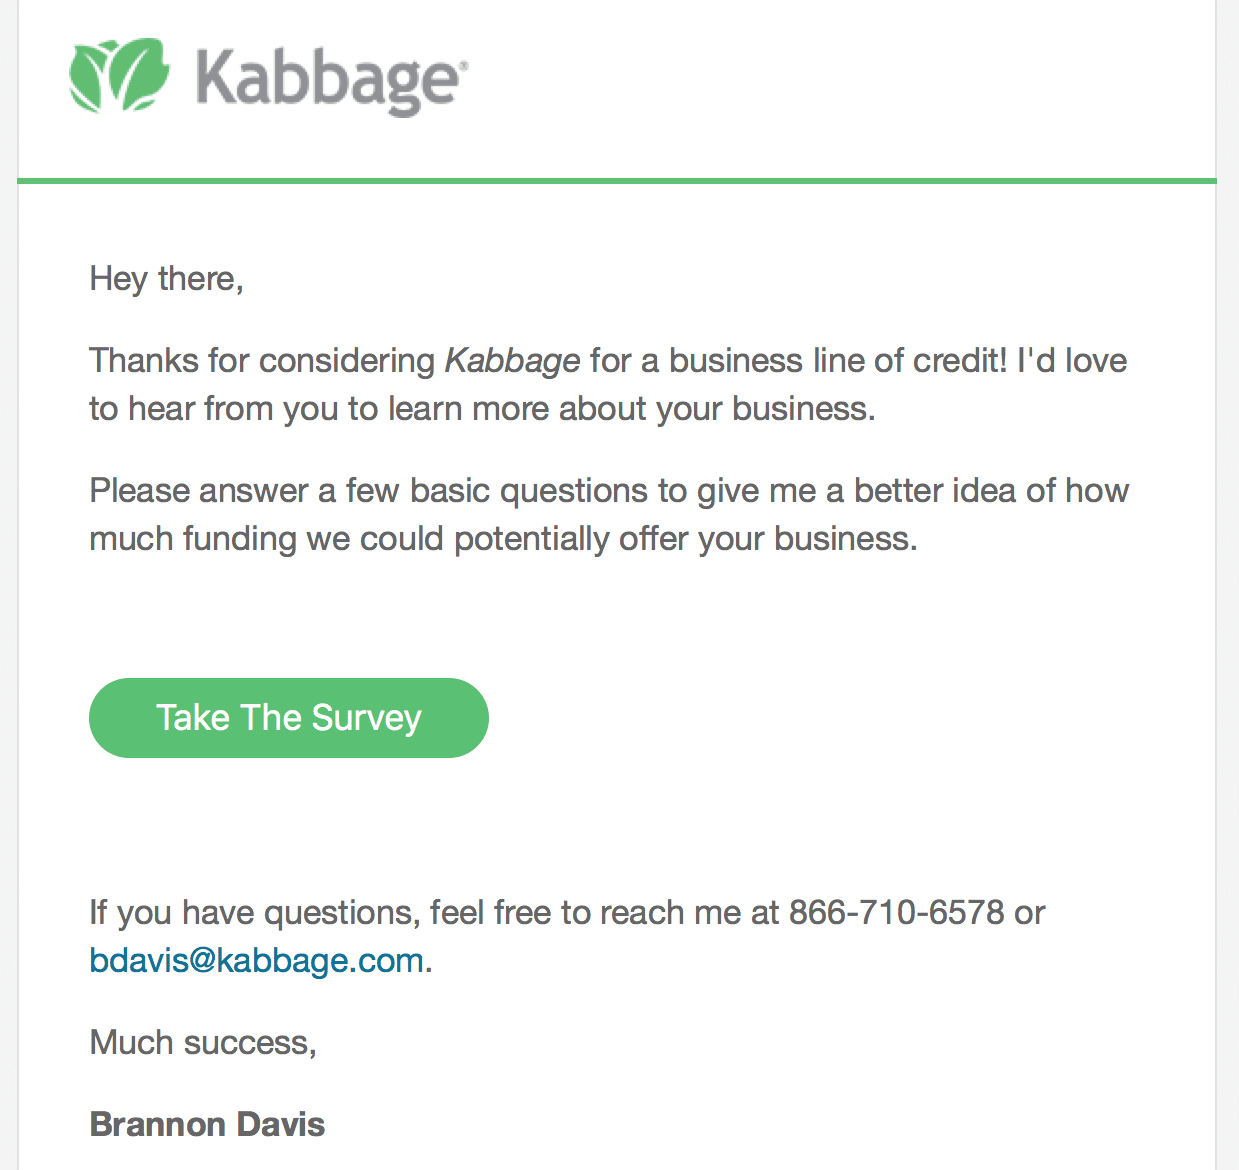 Kabbage – Reengagement Email Marketing with Survey CTA